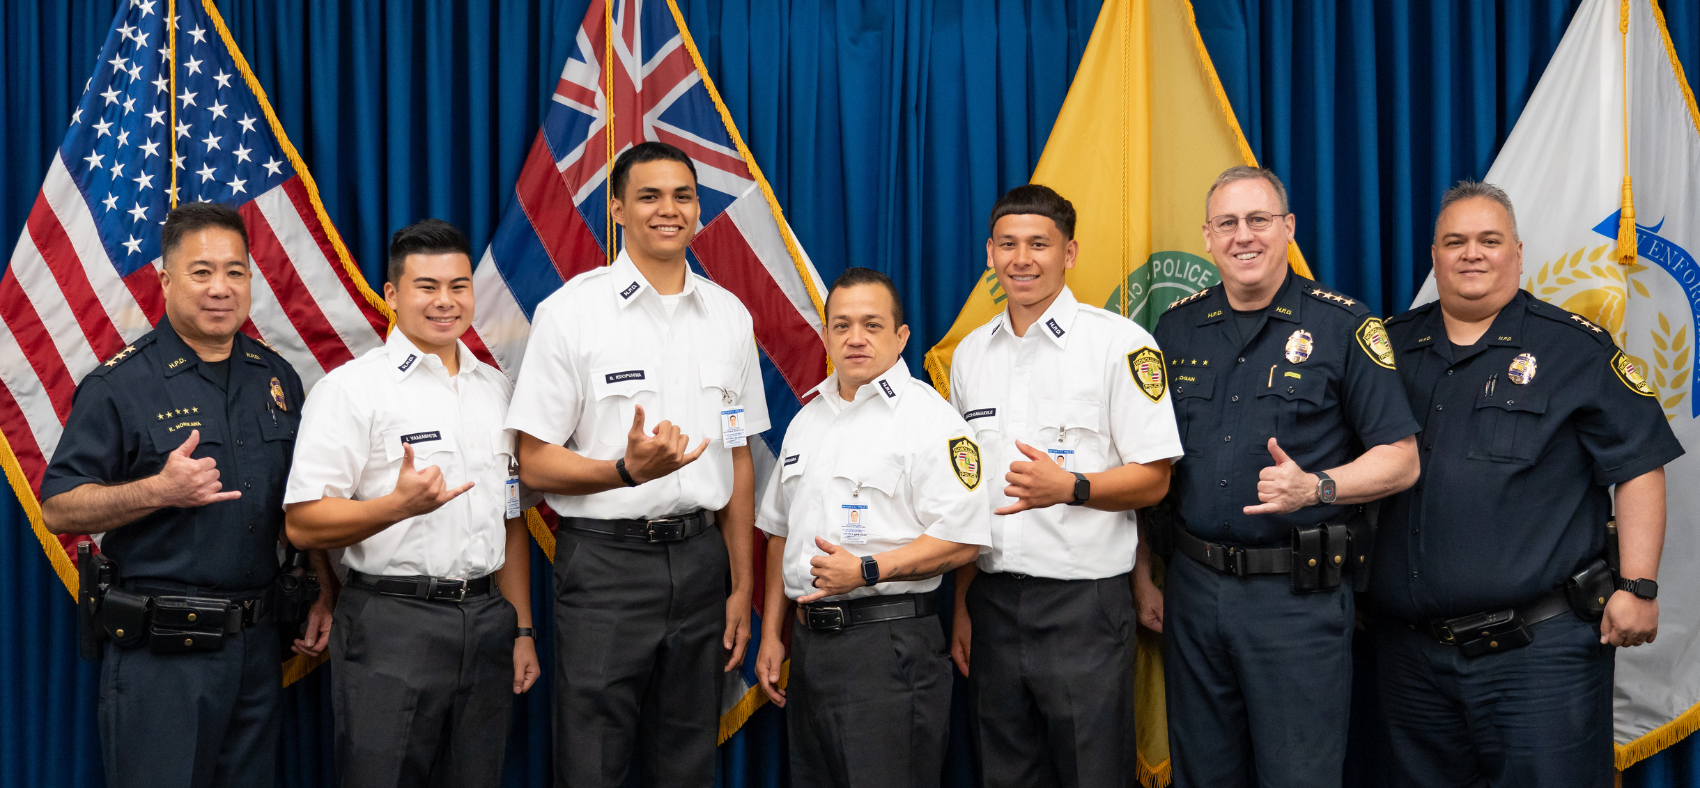 Graphic slider for homepage to highlight the Police Services Officer (PSO) position. Photo consists of four PSO individuals and Chiefs Loga, Horikawa, and Vanic.